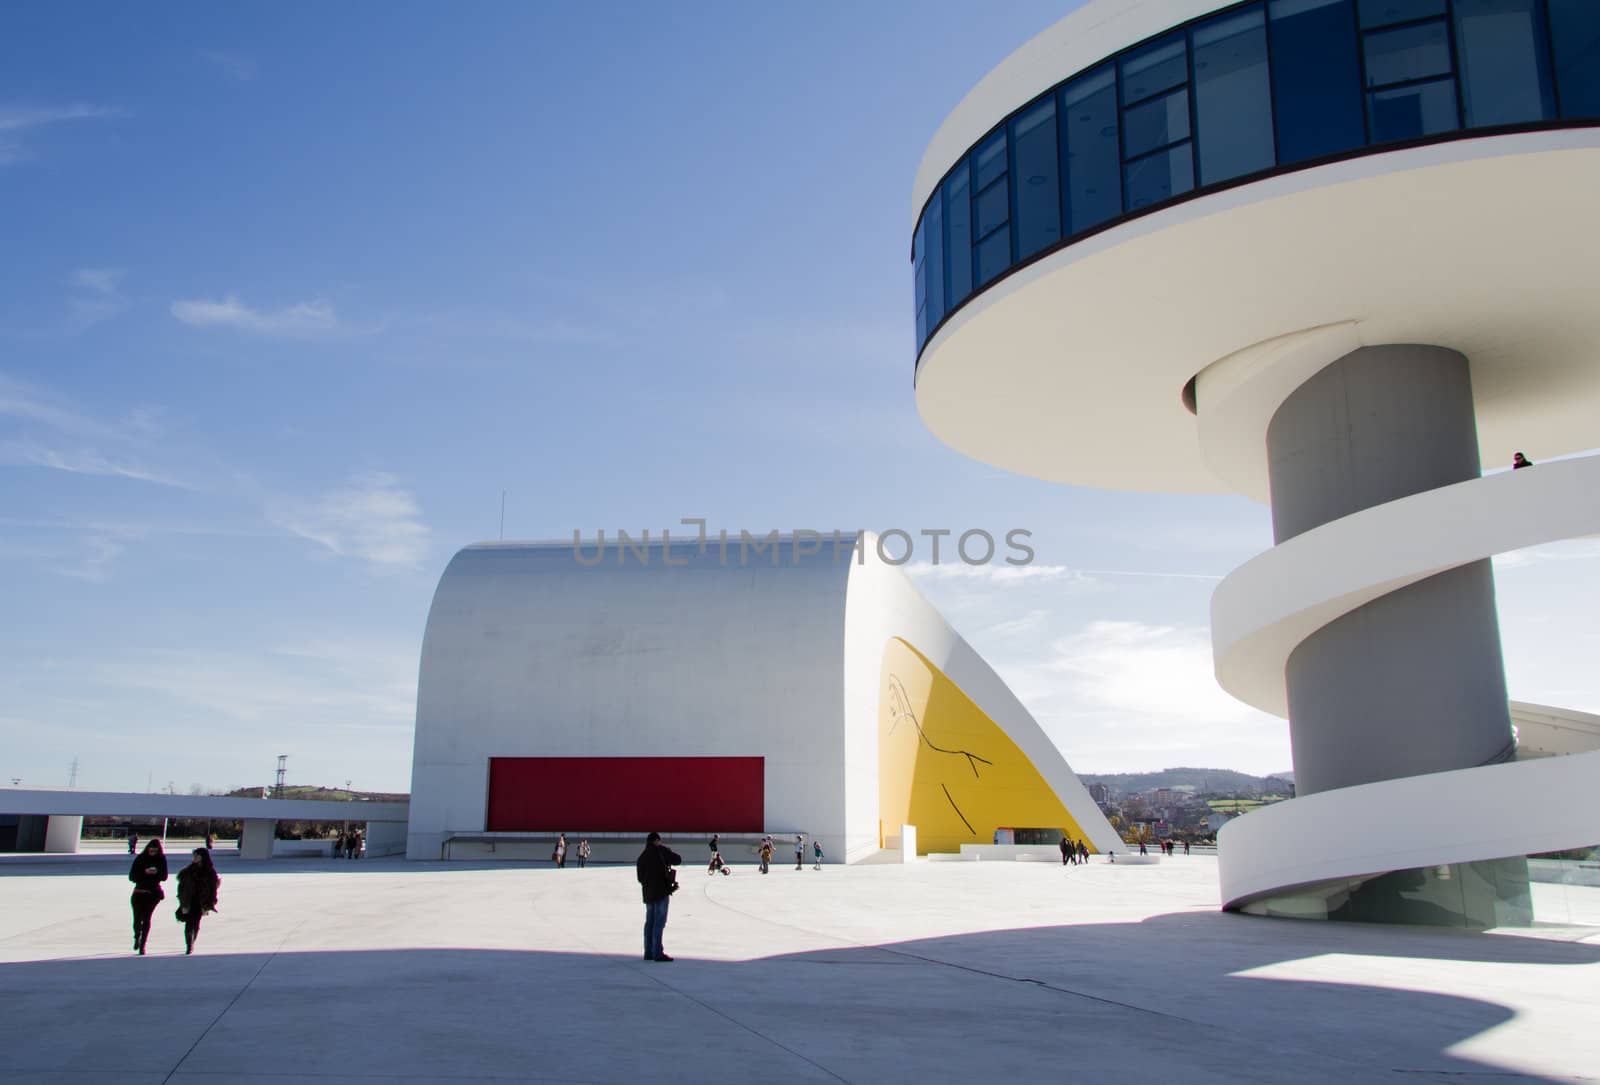 View of Niemeyer Center building, in Aviles, Spain, on December 09, 2012. The cultural center was designed by Brazilian architect Oscar Niemeyer, and was his only work in Spain